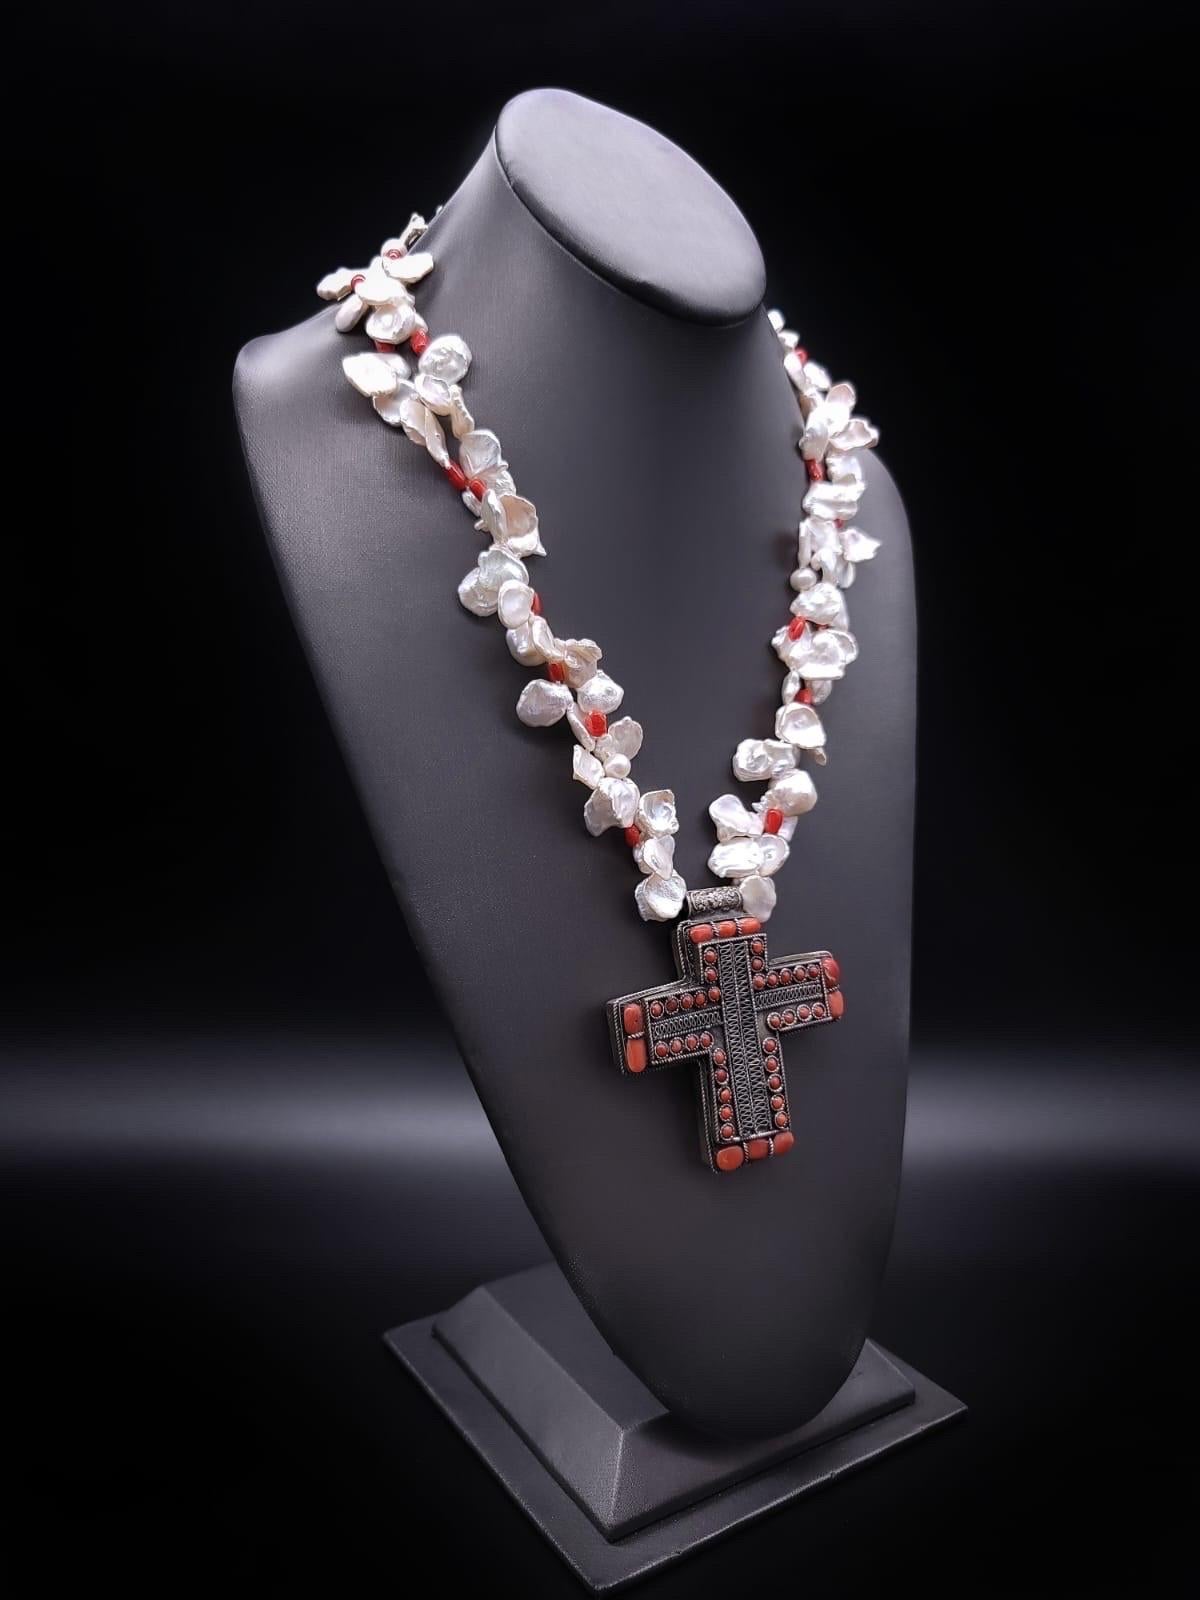 Mixed Cut A.Jeschel Stunning Keshi Pearl necklace with silver cross pendant. For Sale